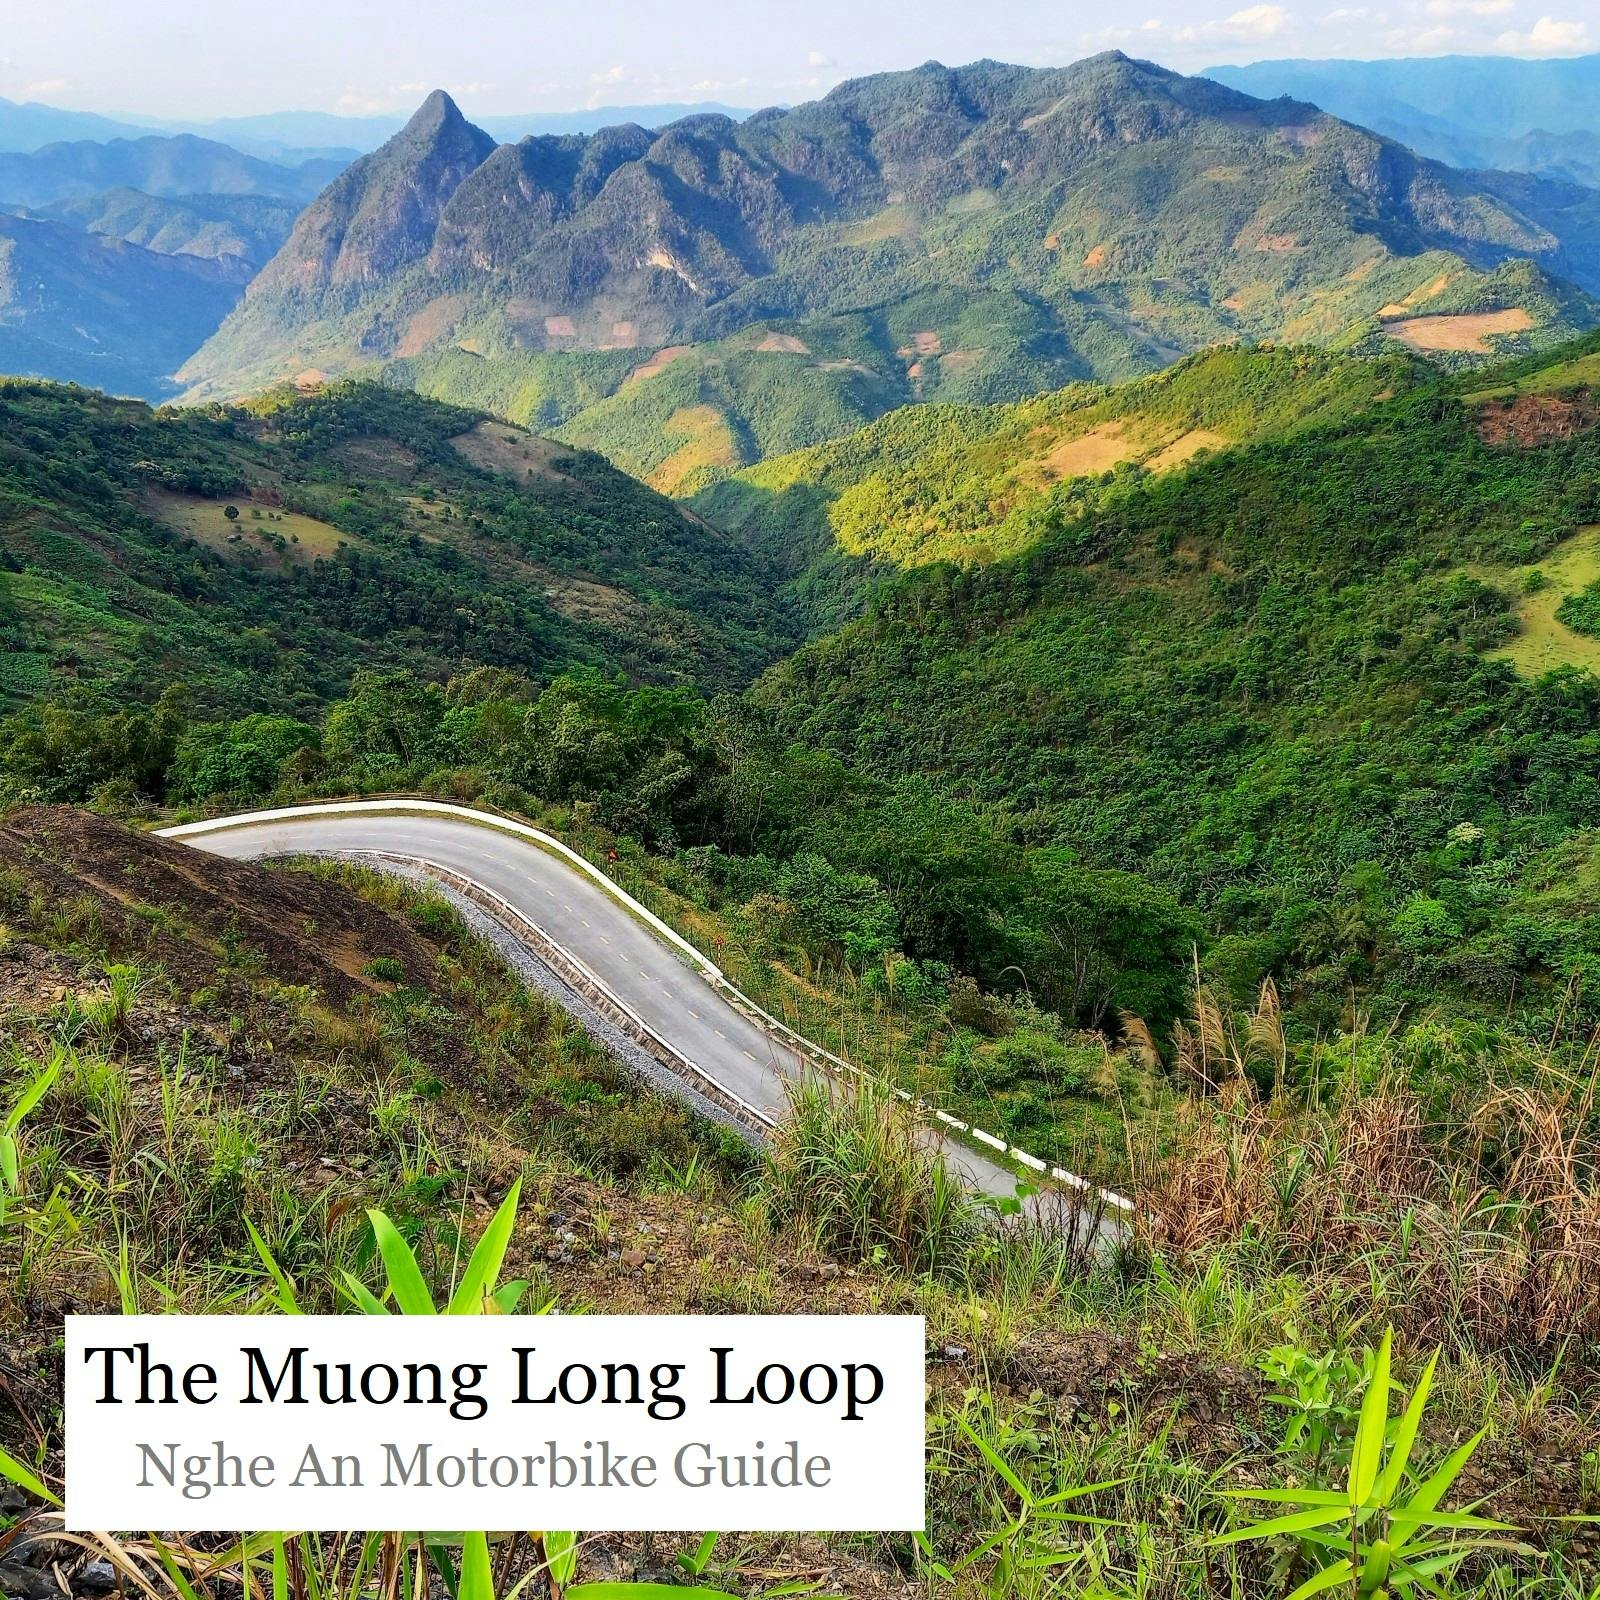 The Muong Long Loop, Nghe An, Motorbike Guide